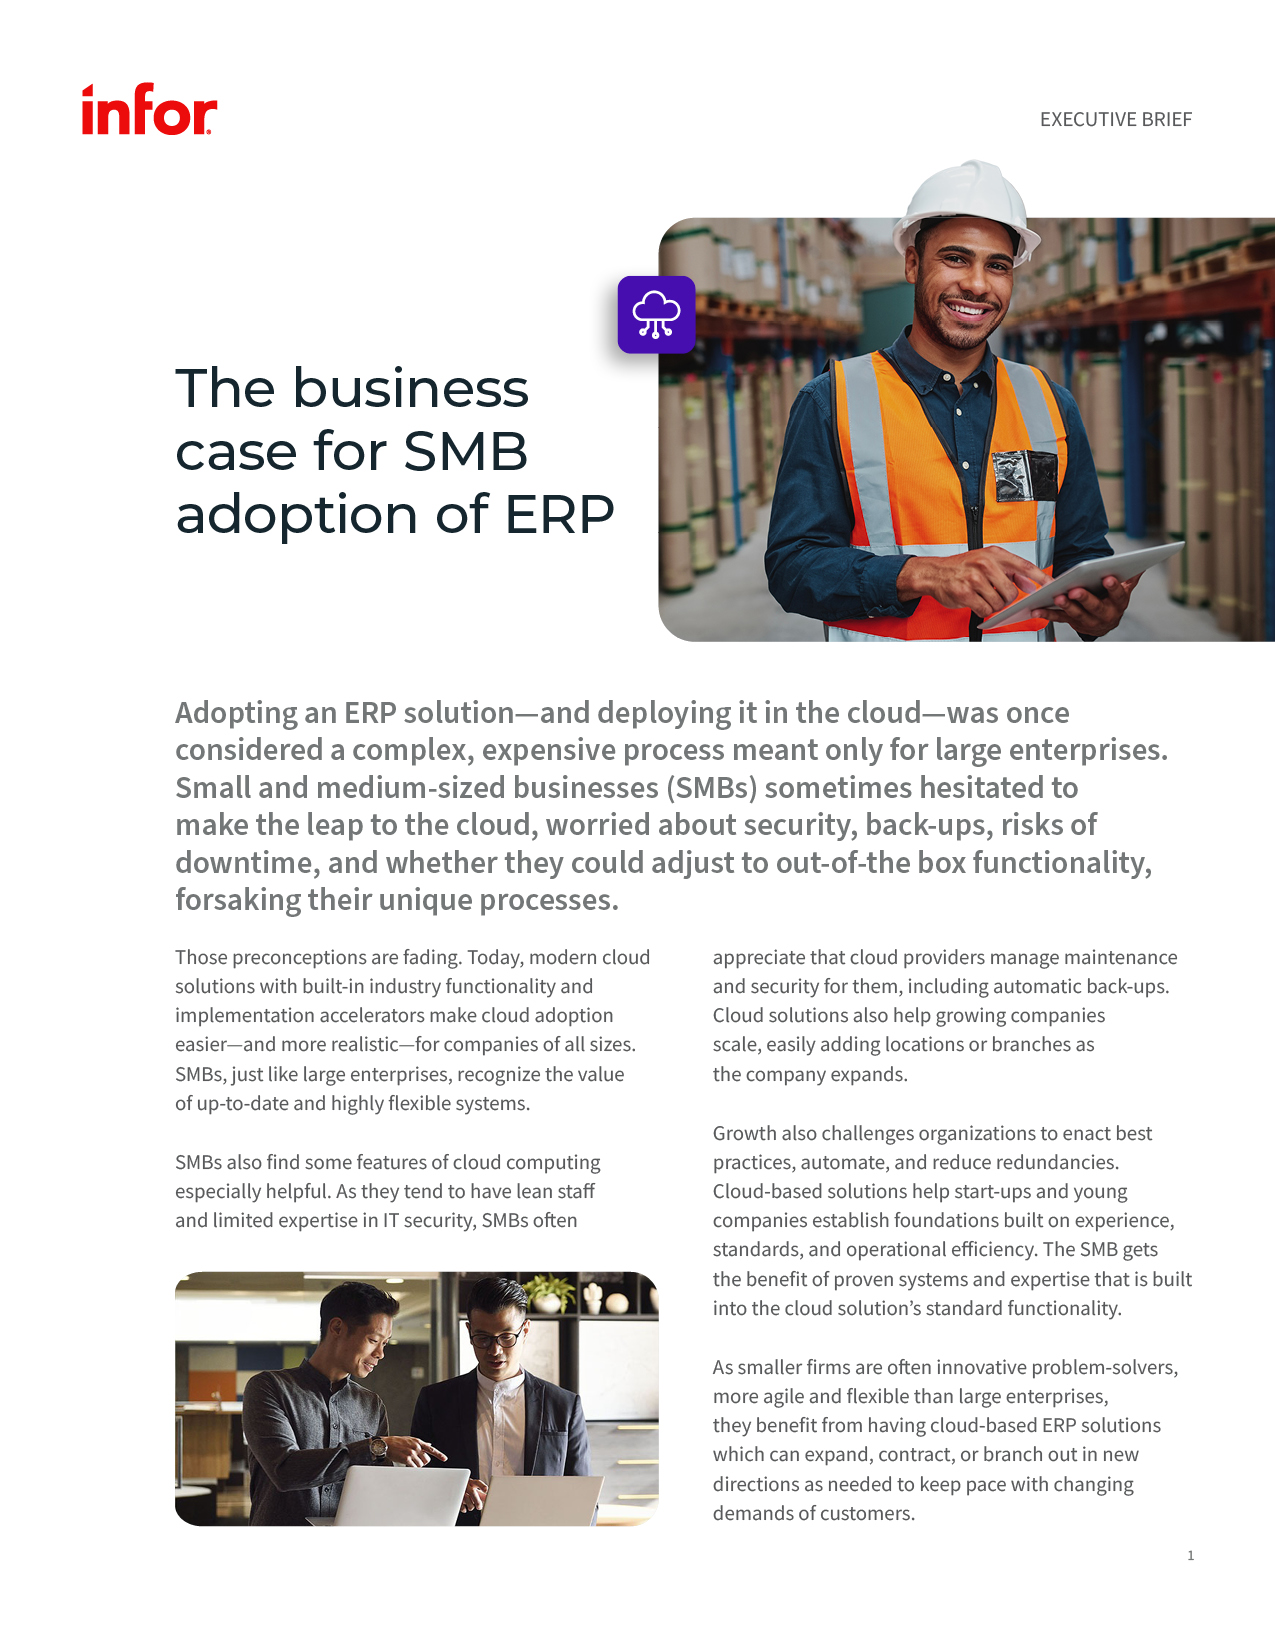 The business case for SMB adoption of ERP